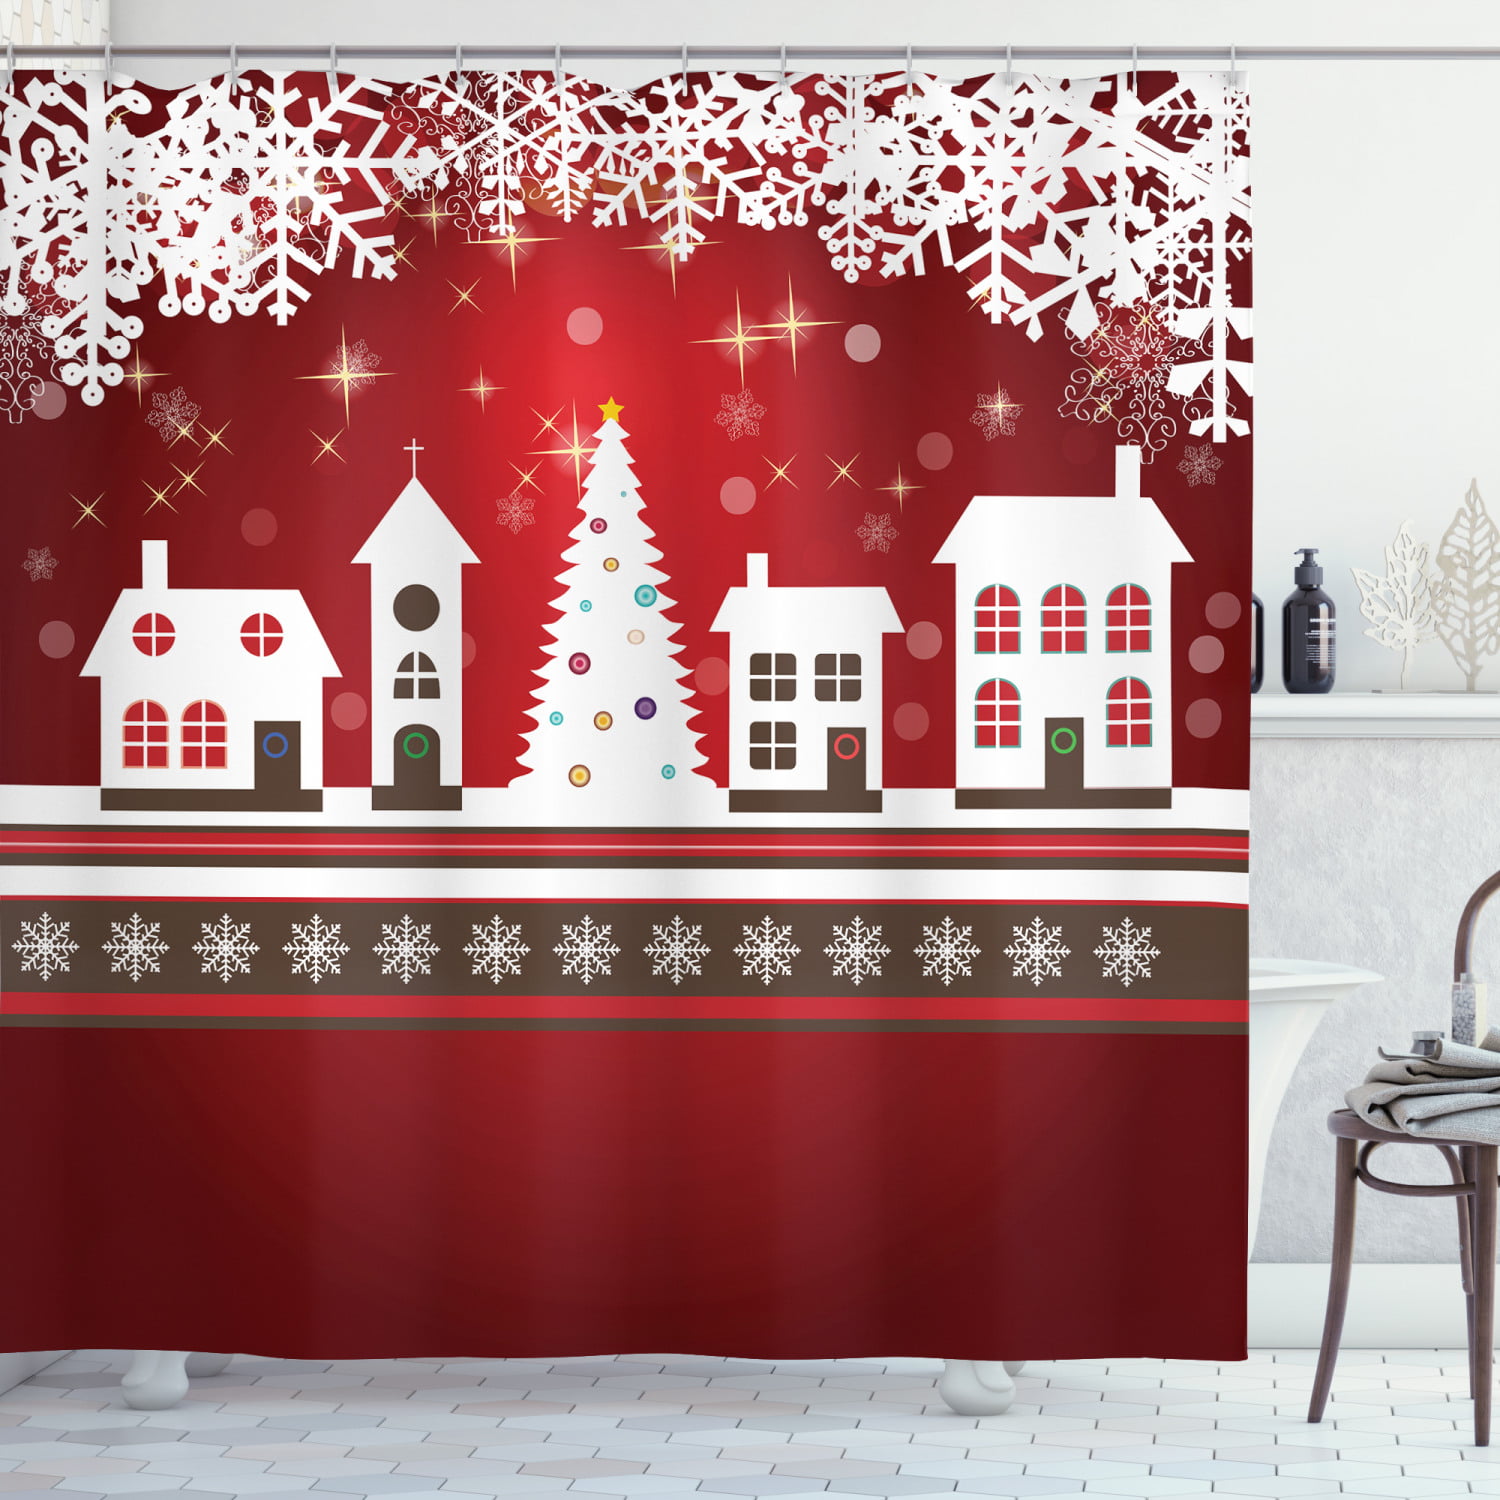 CHRISTMAS FABRIC SHOWER CURTAIN 13 Piece Set VINTAGE RED TRUCK W/ CHRISTMAS TREE 